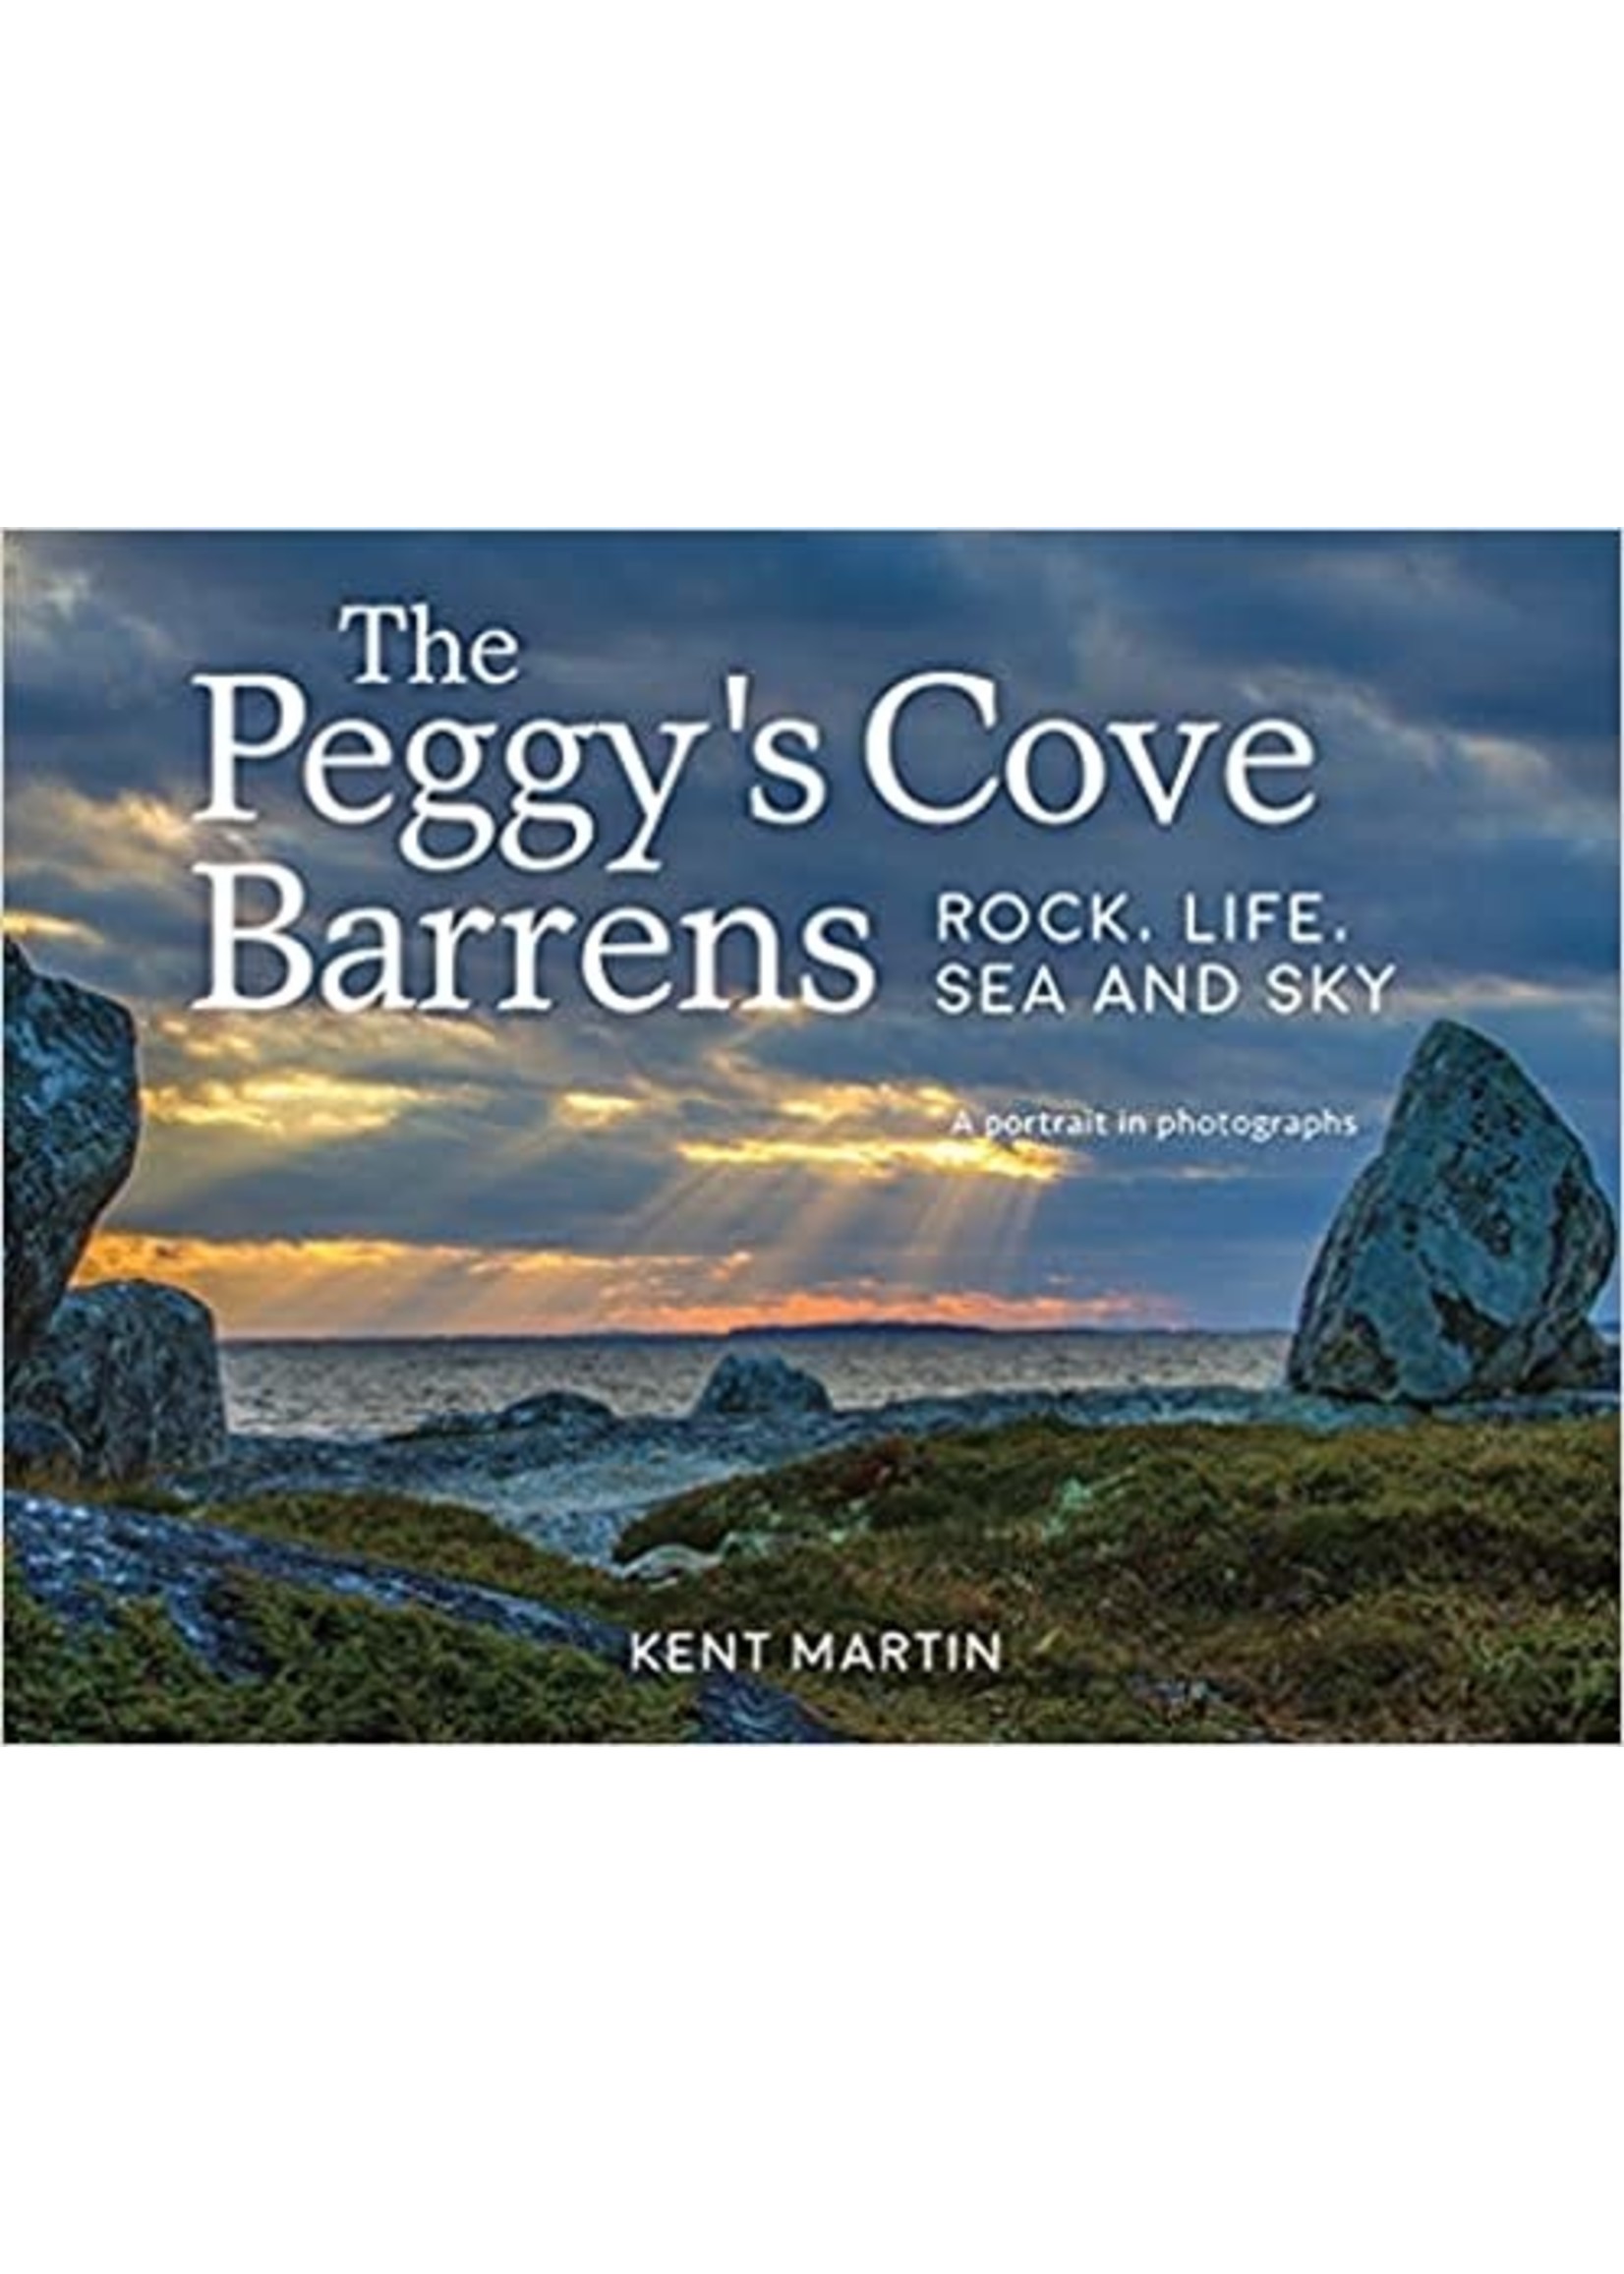 The Peggy’s Cove Barrens: Rock, Life, Sea and Sky - A portrait in photographs By Kent Martin